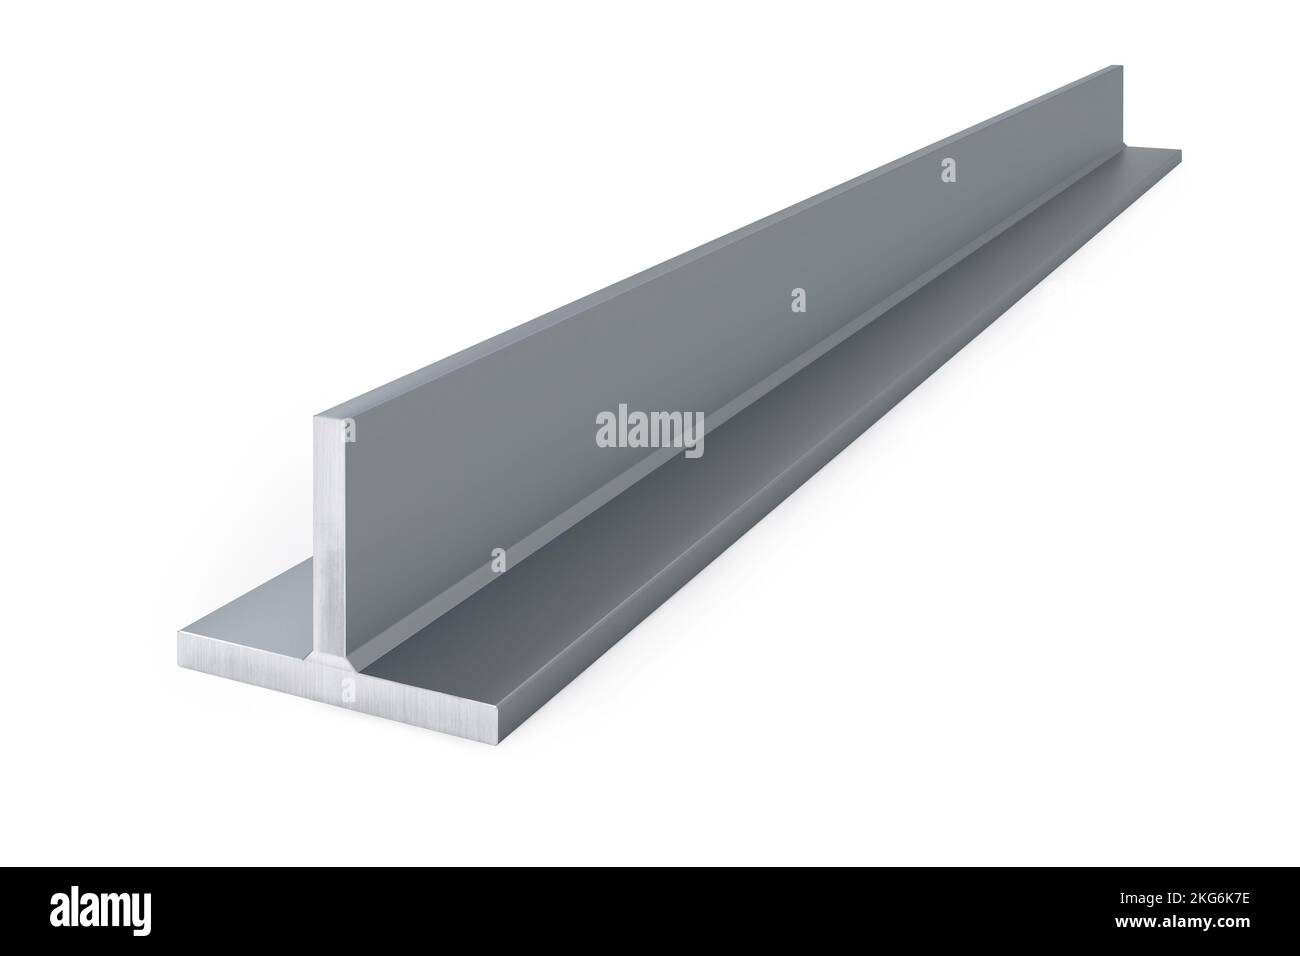 T profile or structural tee steel beam isolated on white background - 3d rendering Stock Photo